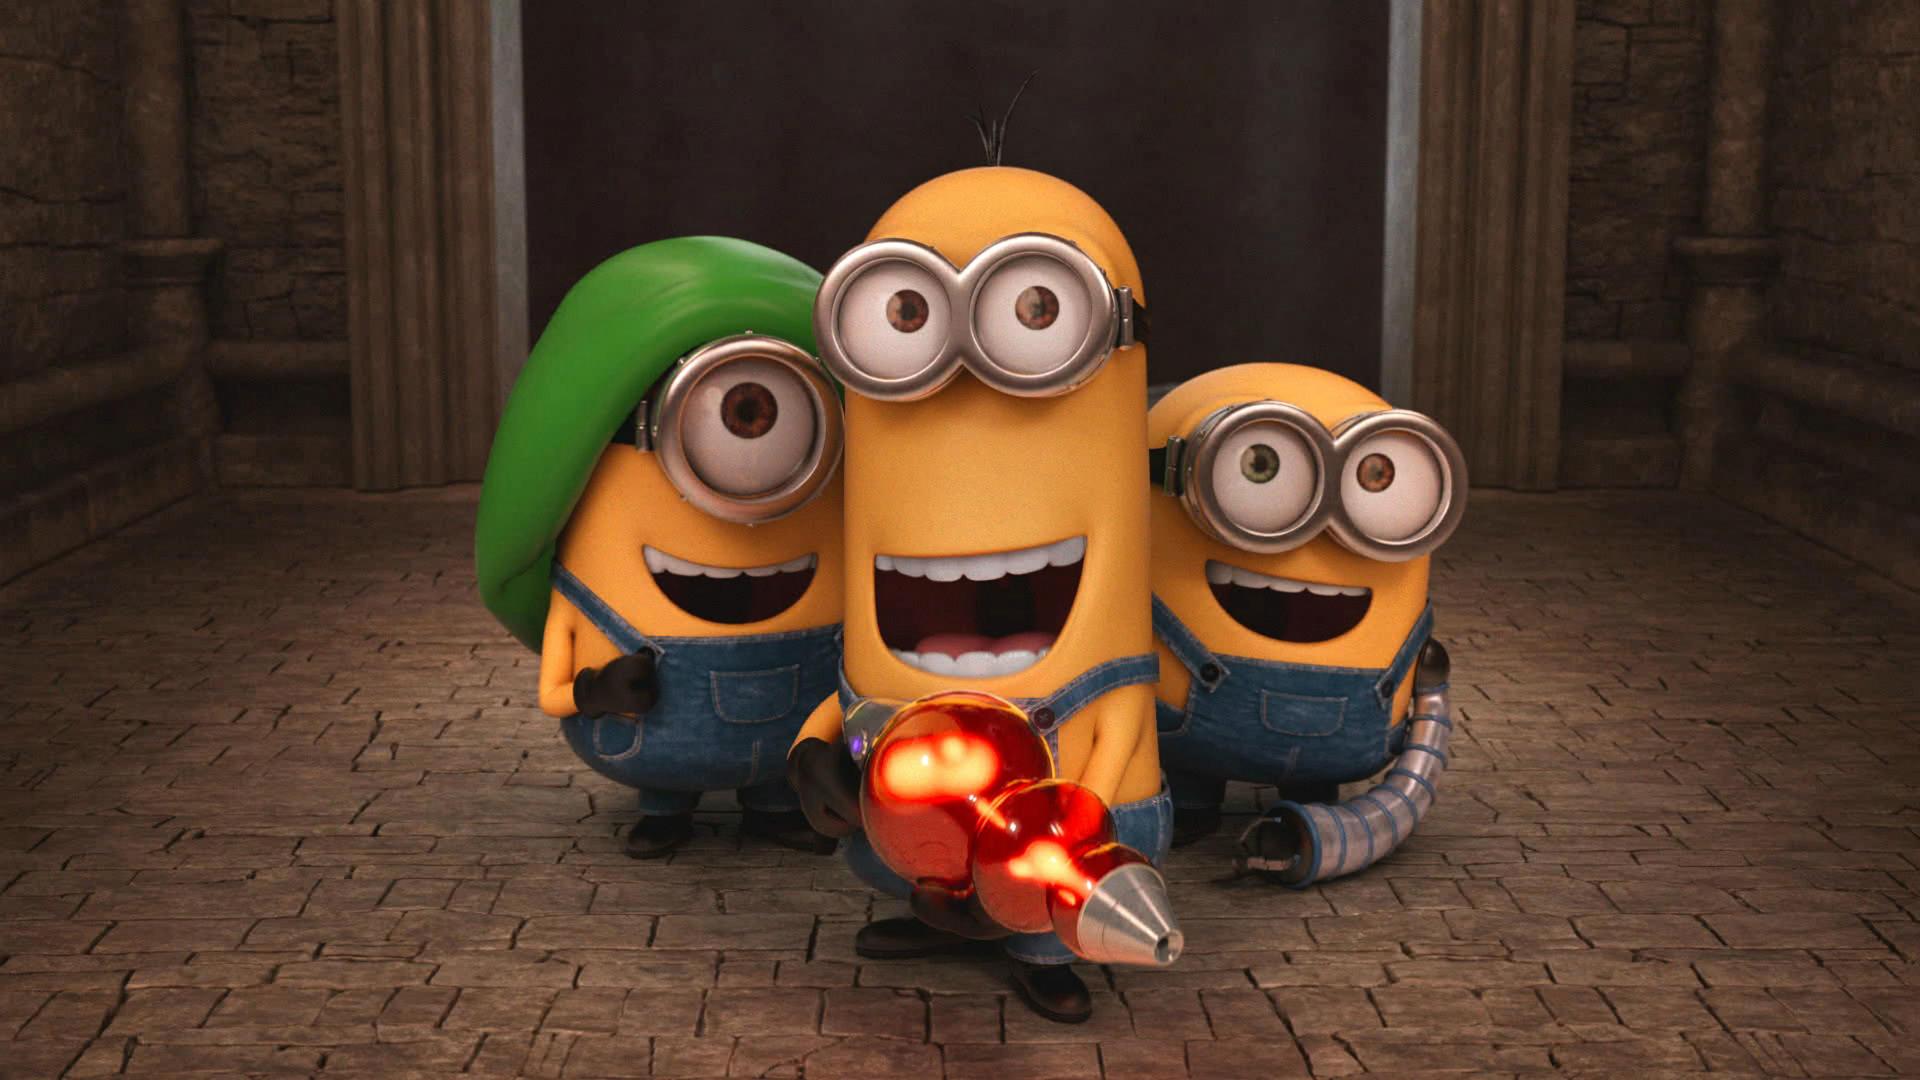 Meet The 'Minions': Your Adorable Guide To The Good And The Not So